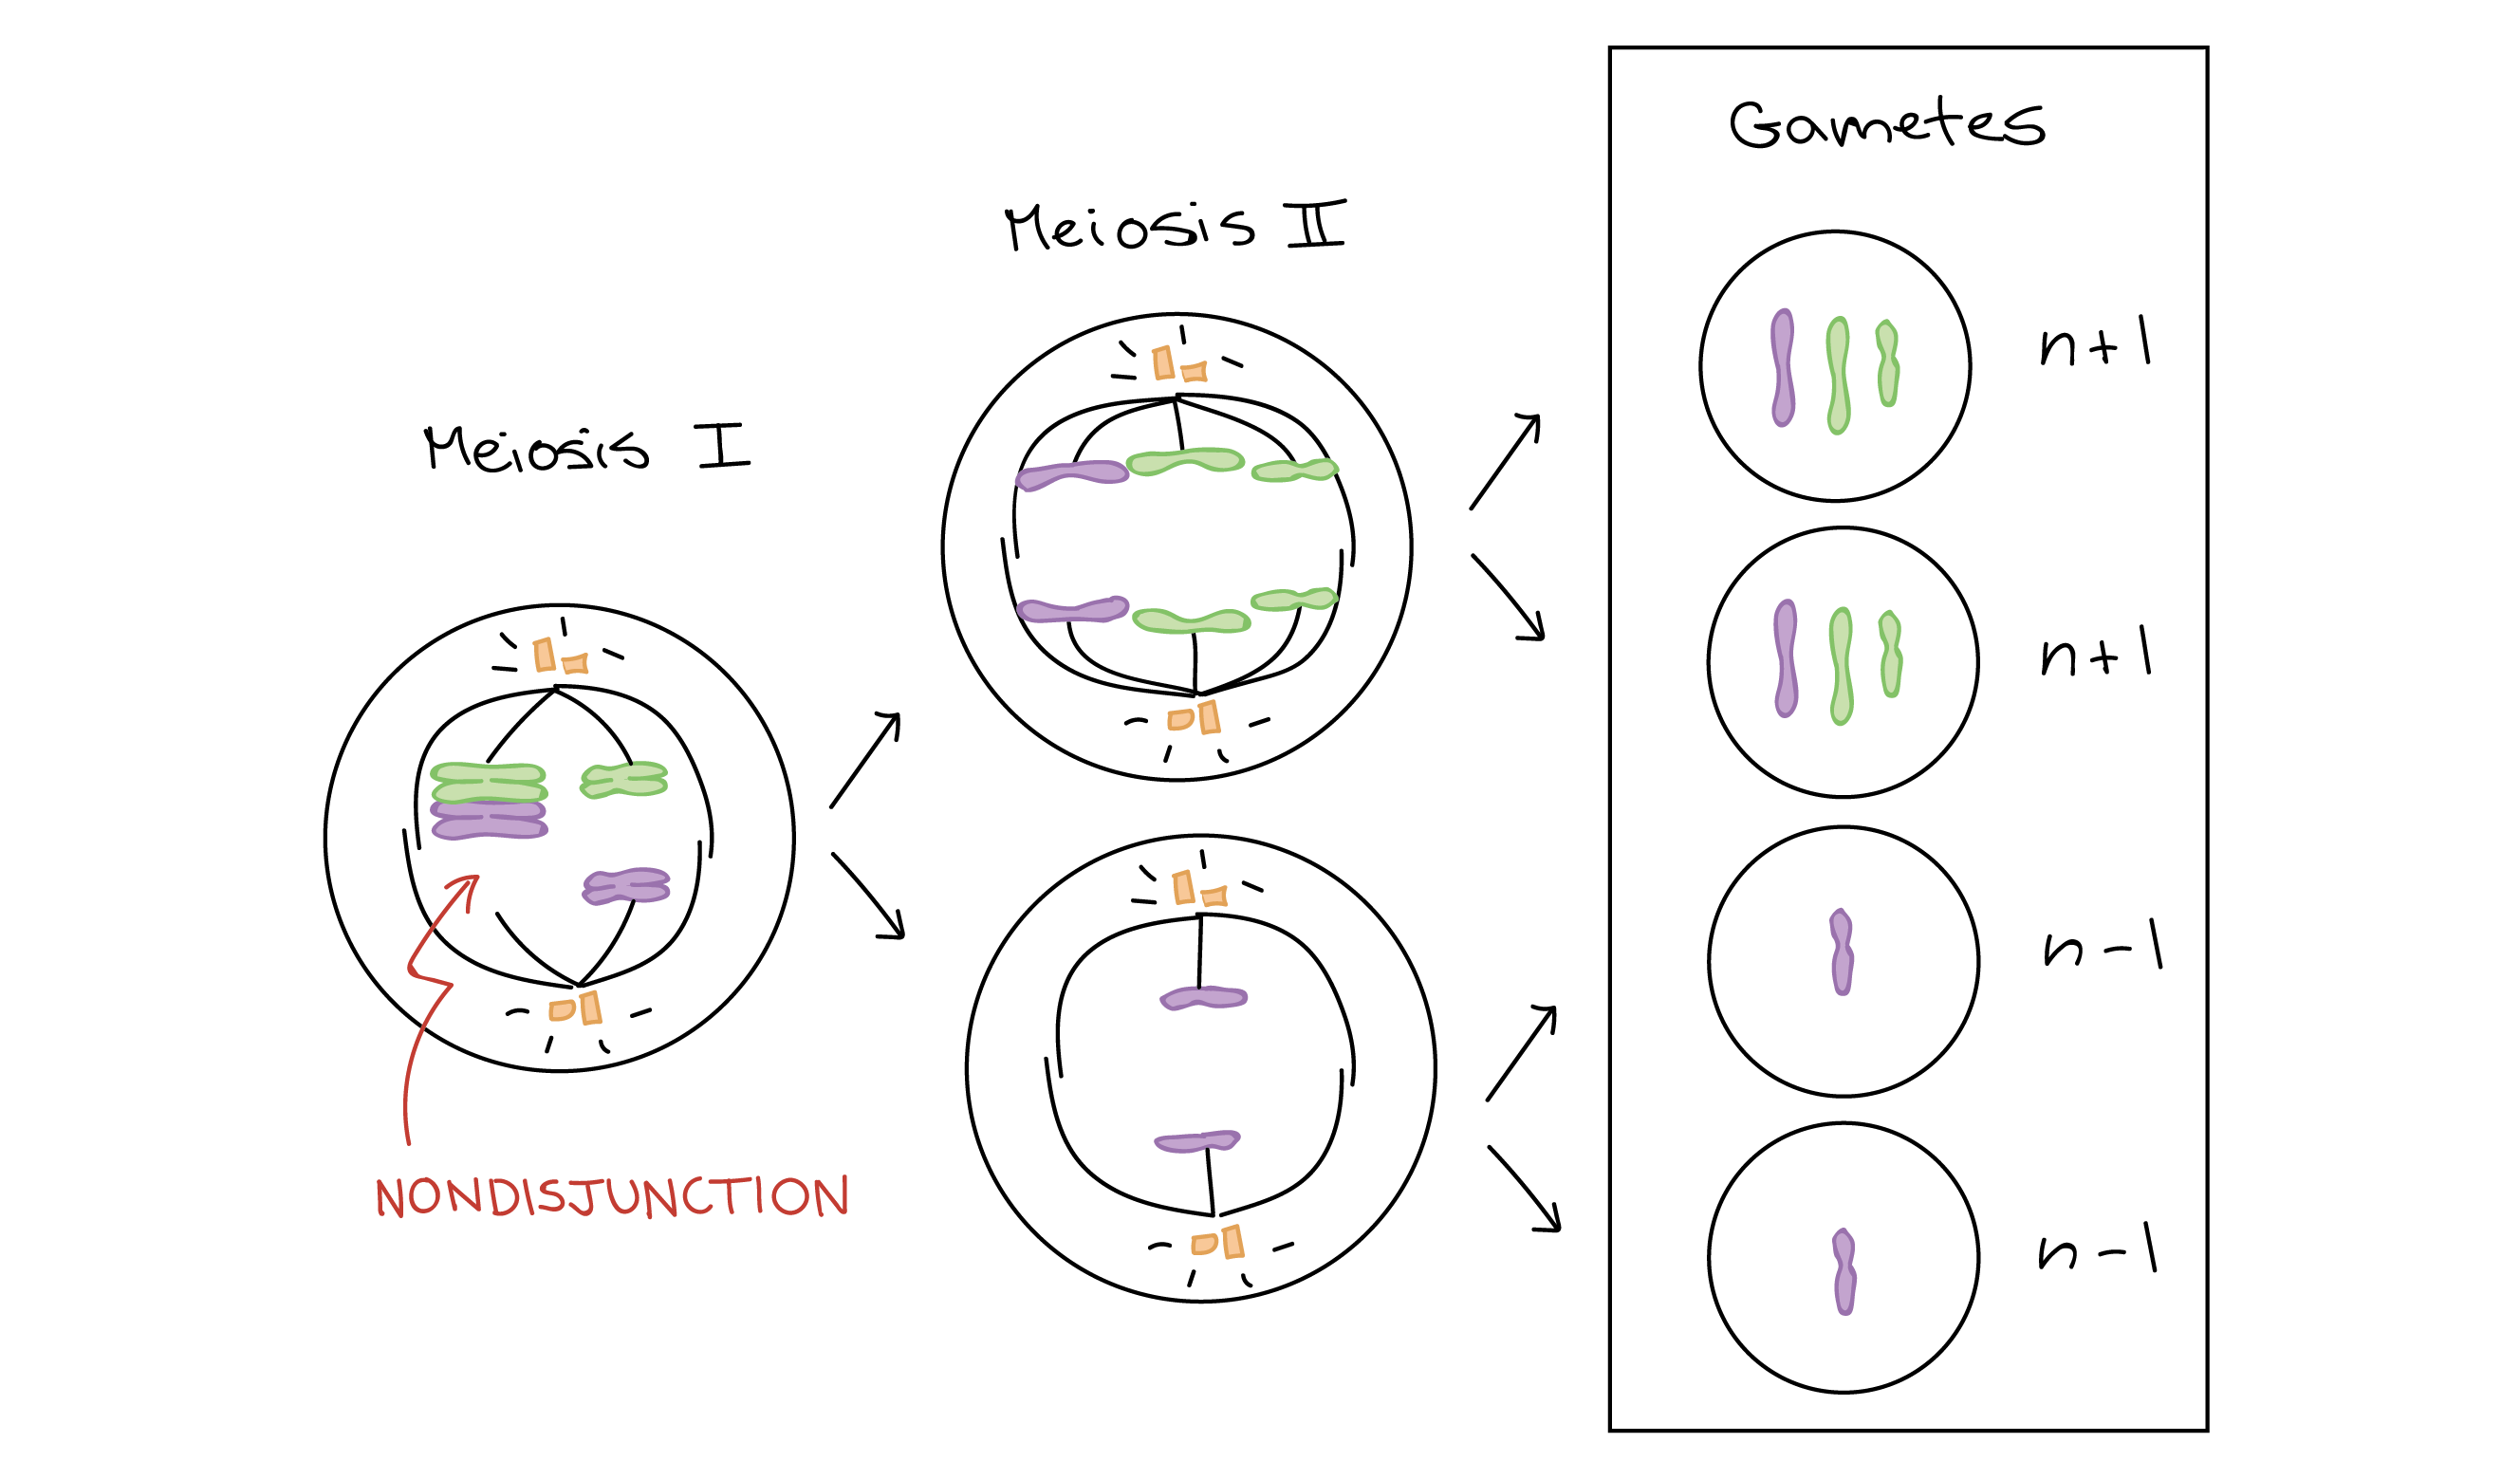 Diagram depicting nondisjunction in meioisis I. One pair of homologous chromosomes fail to separate during meiosis I, leading to two abnormal cells as products of meiosis I: one cell with an extra chromosome and one with a missing chromosome. In meiosis II, the chromatid of the chromosomes are separated normally. This leads to production of two gametes with an extra chromosome (n+1 gametes) and two gametes with a missing chromosome (n-1 gametes).